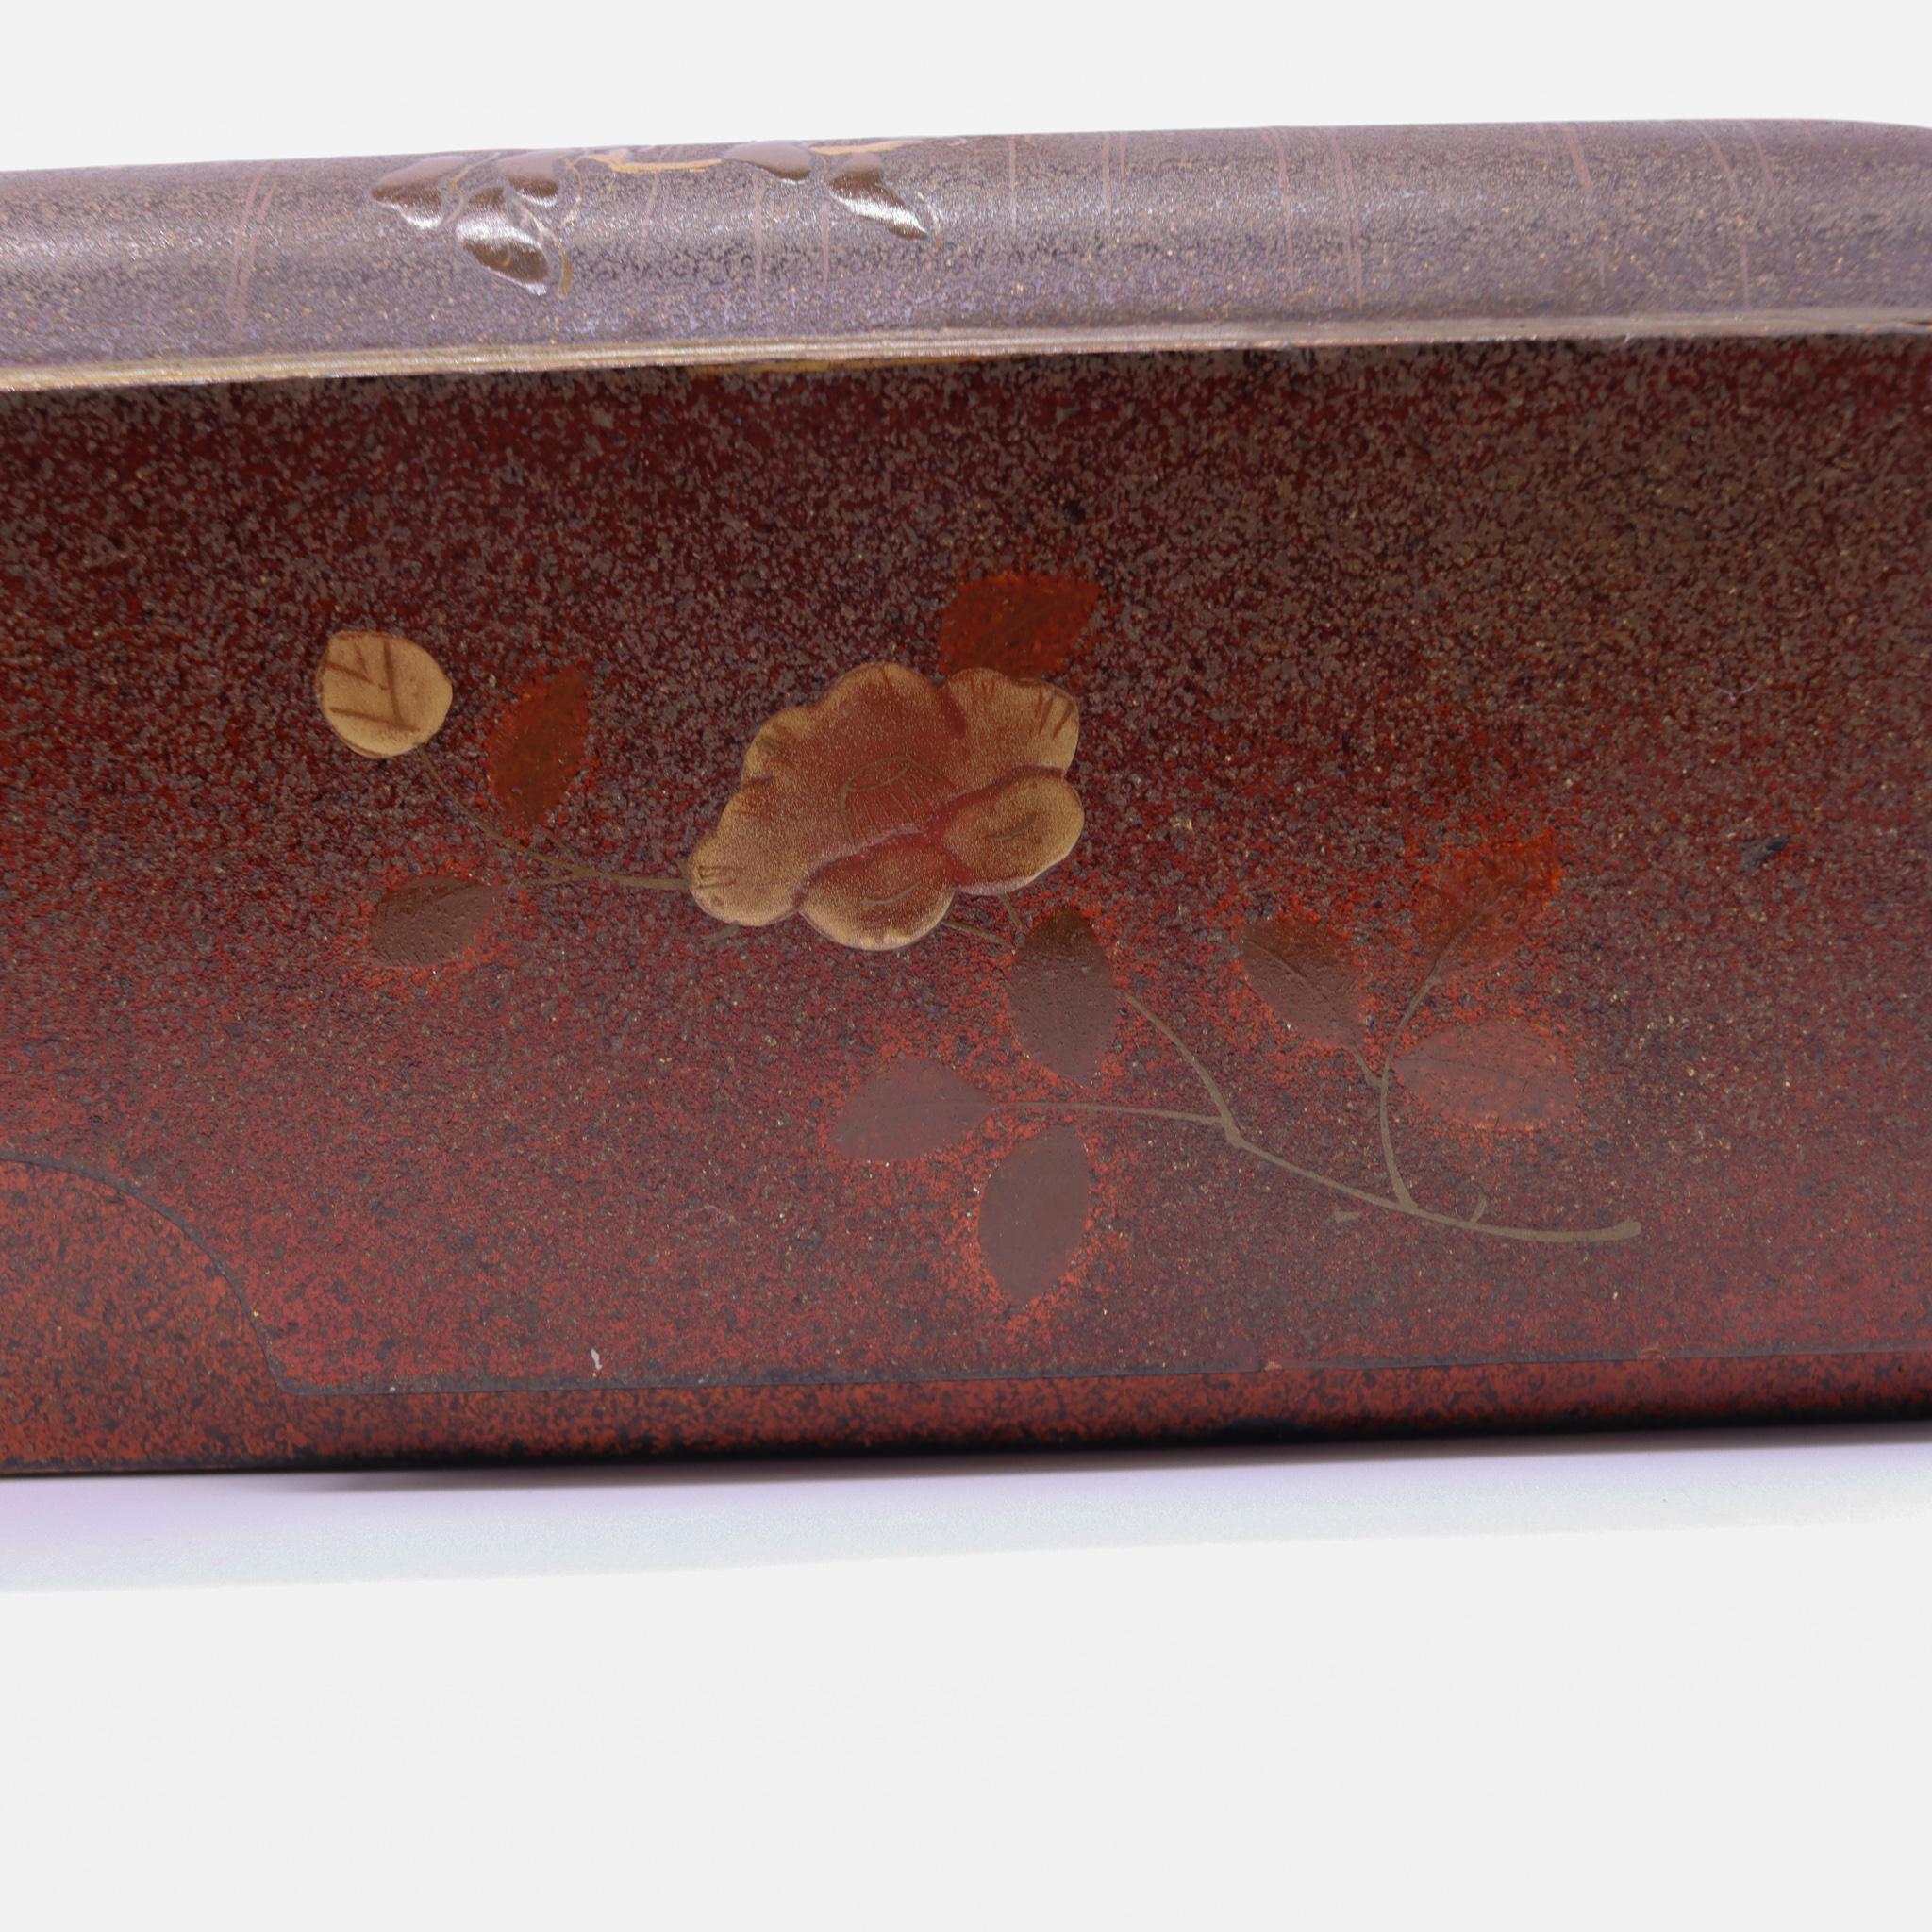 Silver Japan Meiji Period 1890 Fubako Box Letters Lacquered Polychromate Wood Polychrom